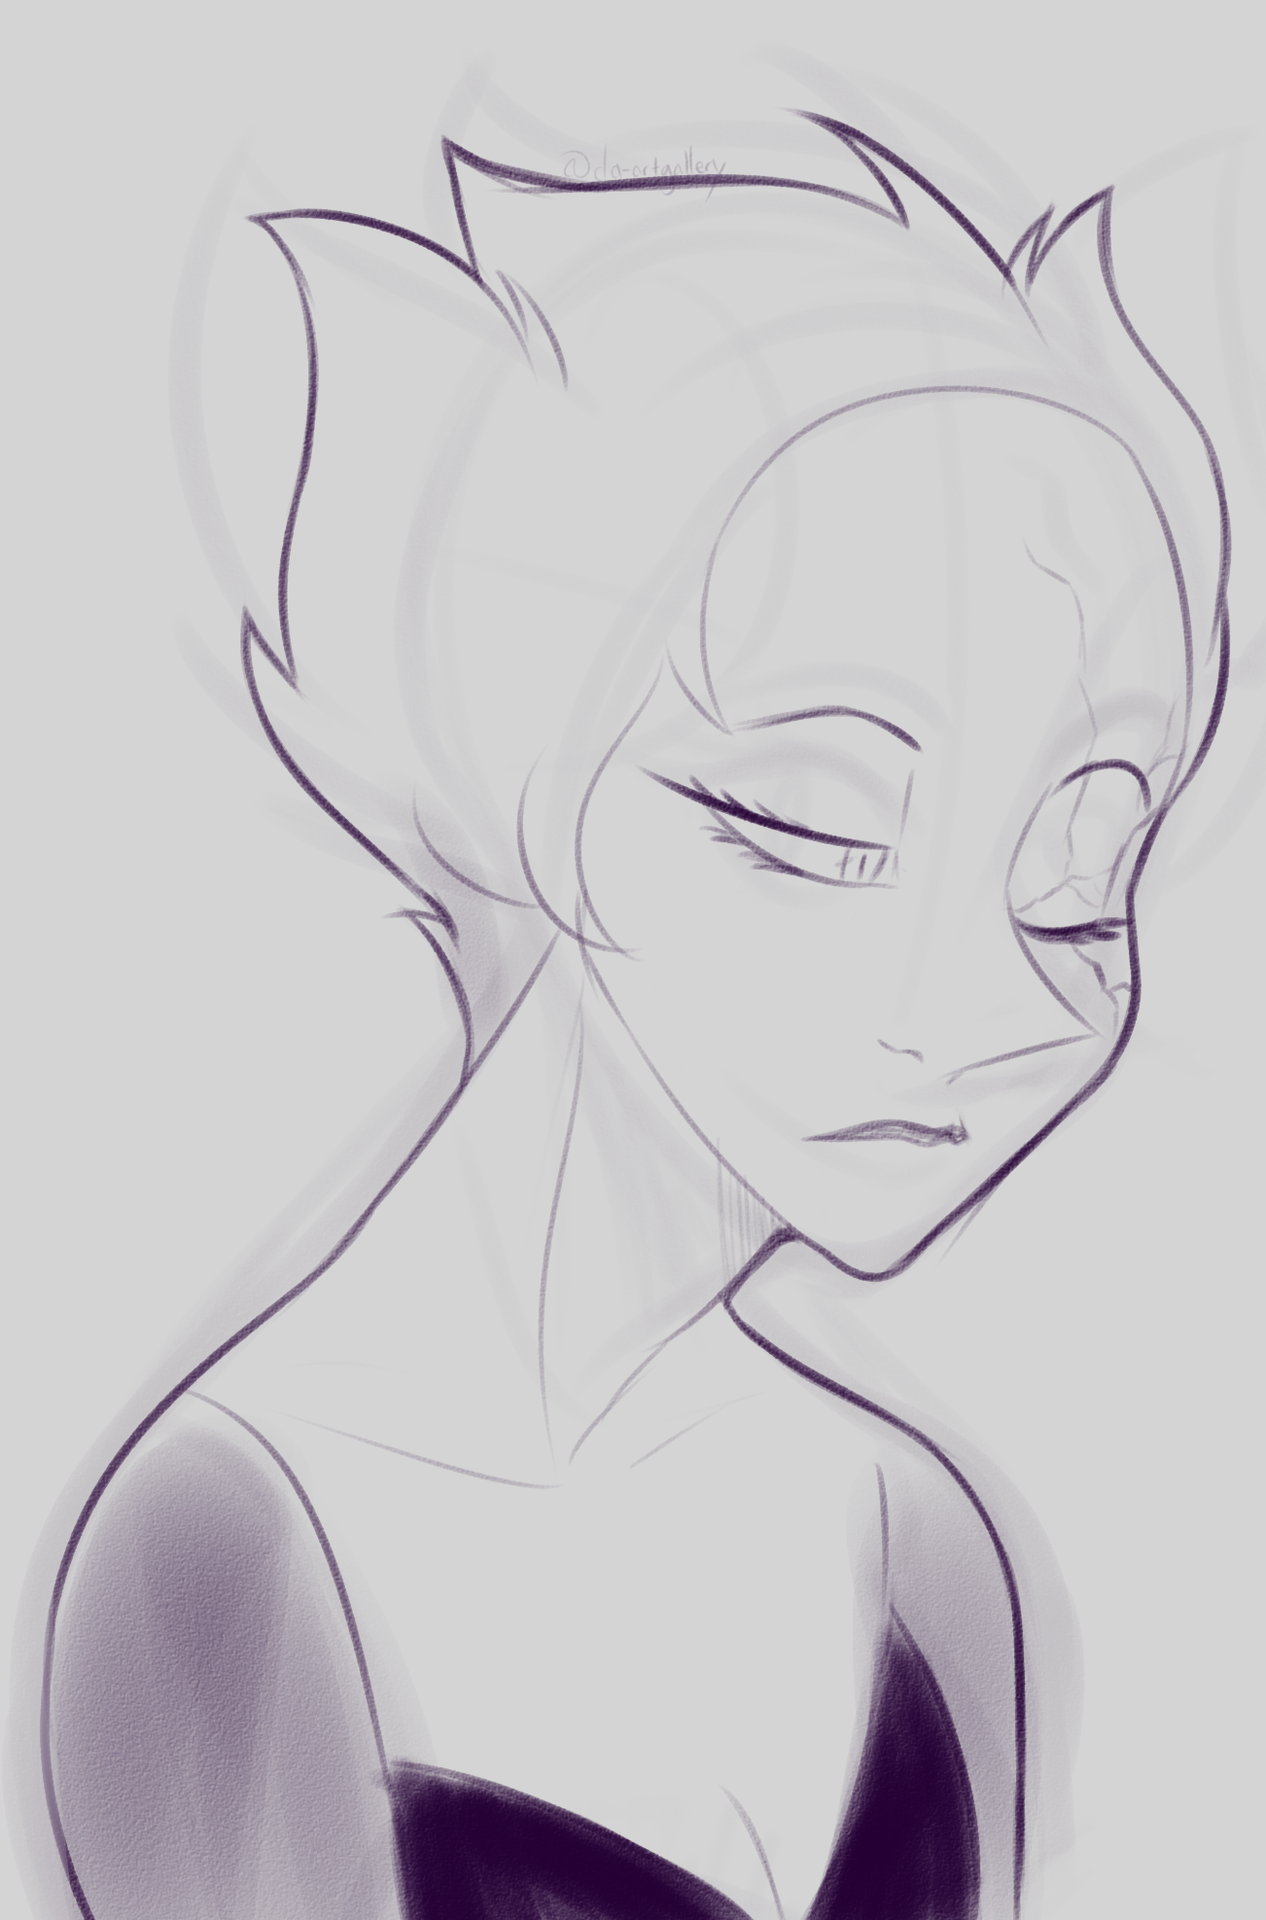 What if White Diamond’s pearl undid her hair?